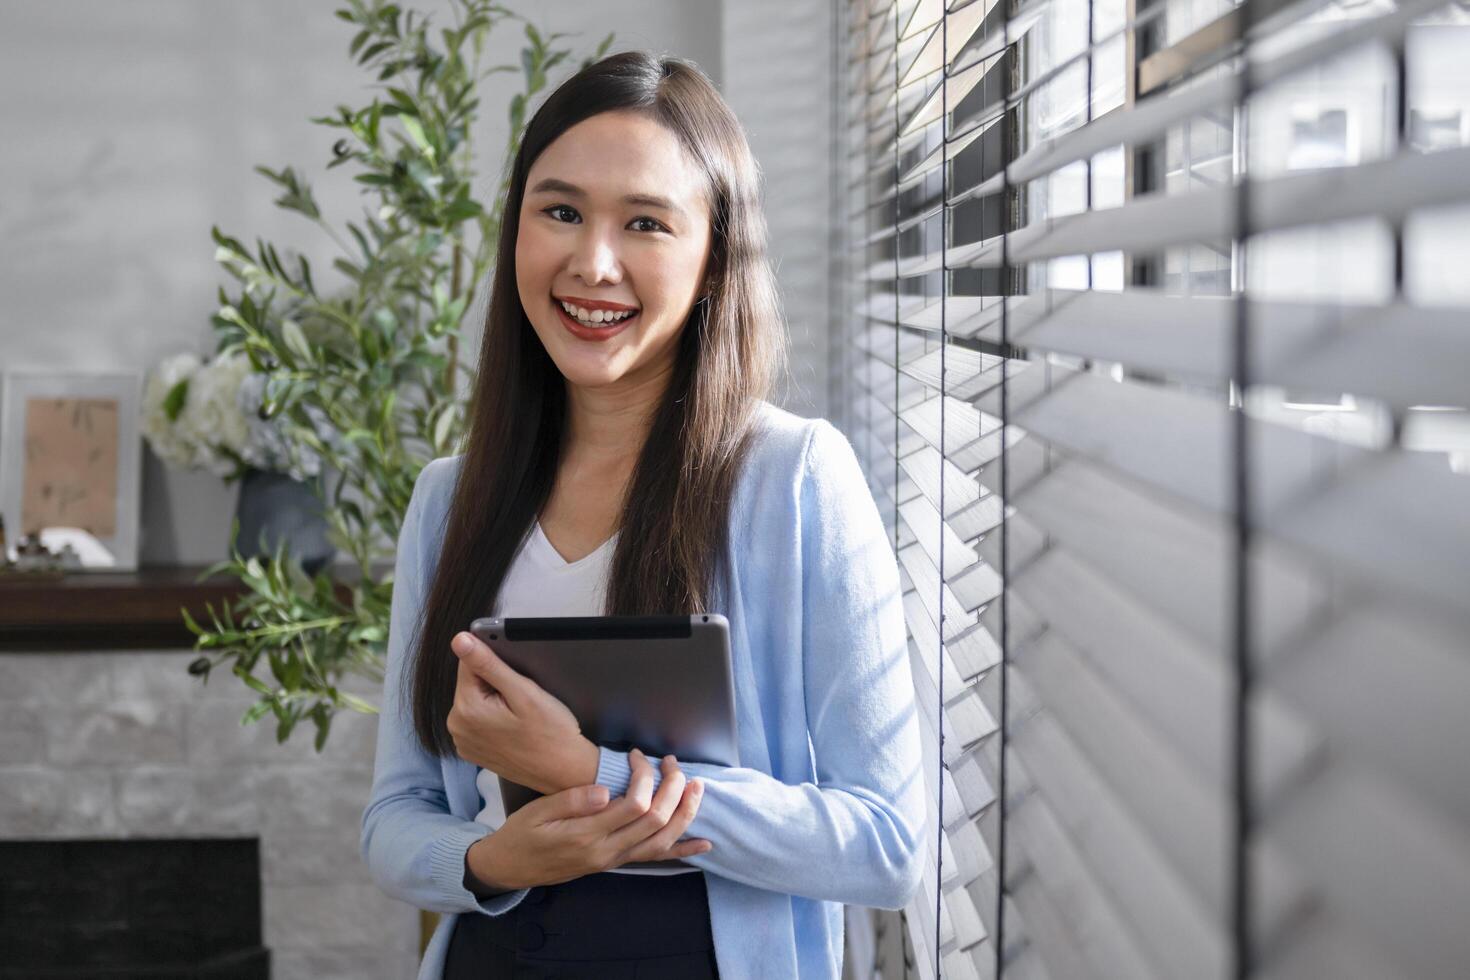 Confident businesswoman standing smiling holding iPad in office photo